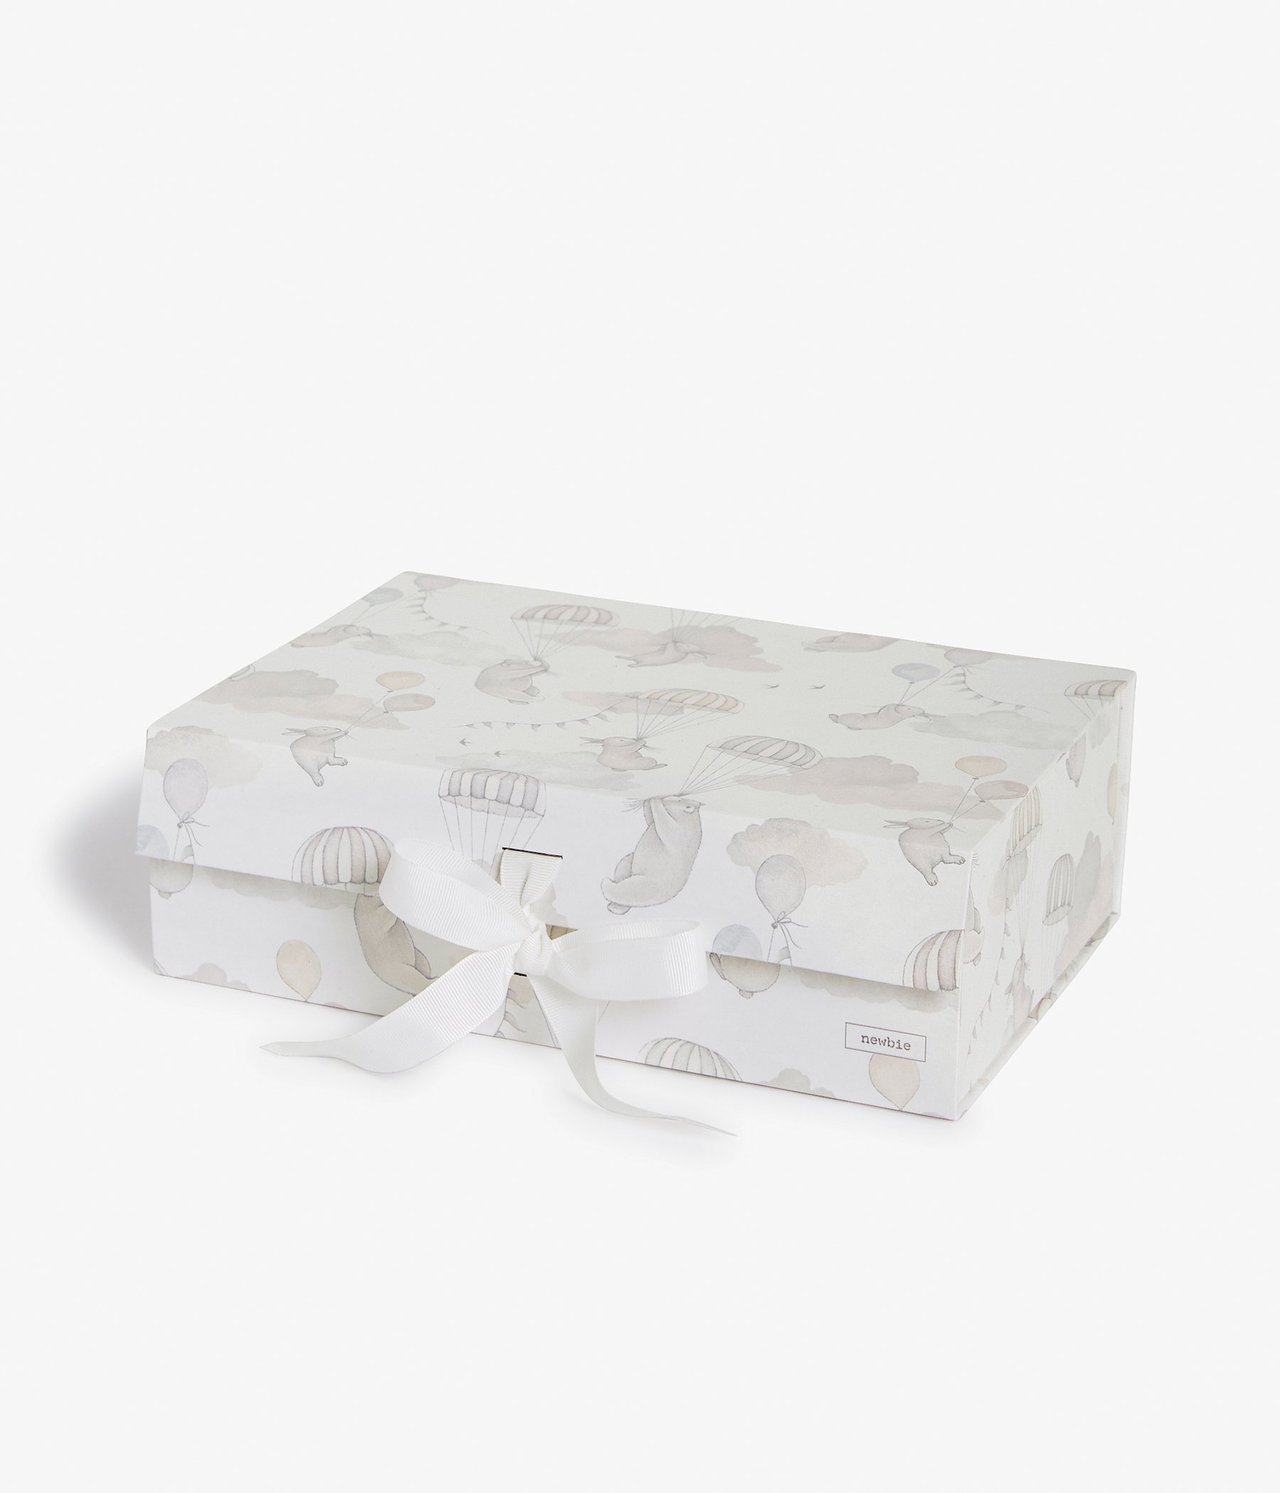 Presentbox Offwhite - ONE SIZE - 0